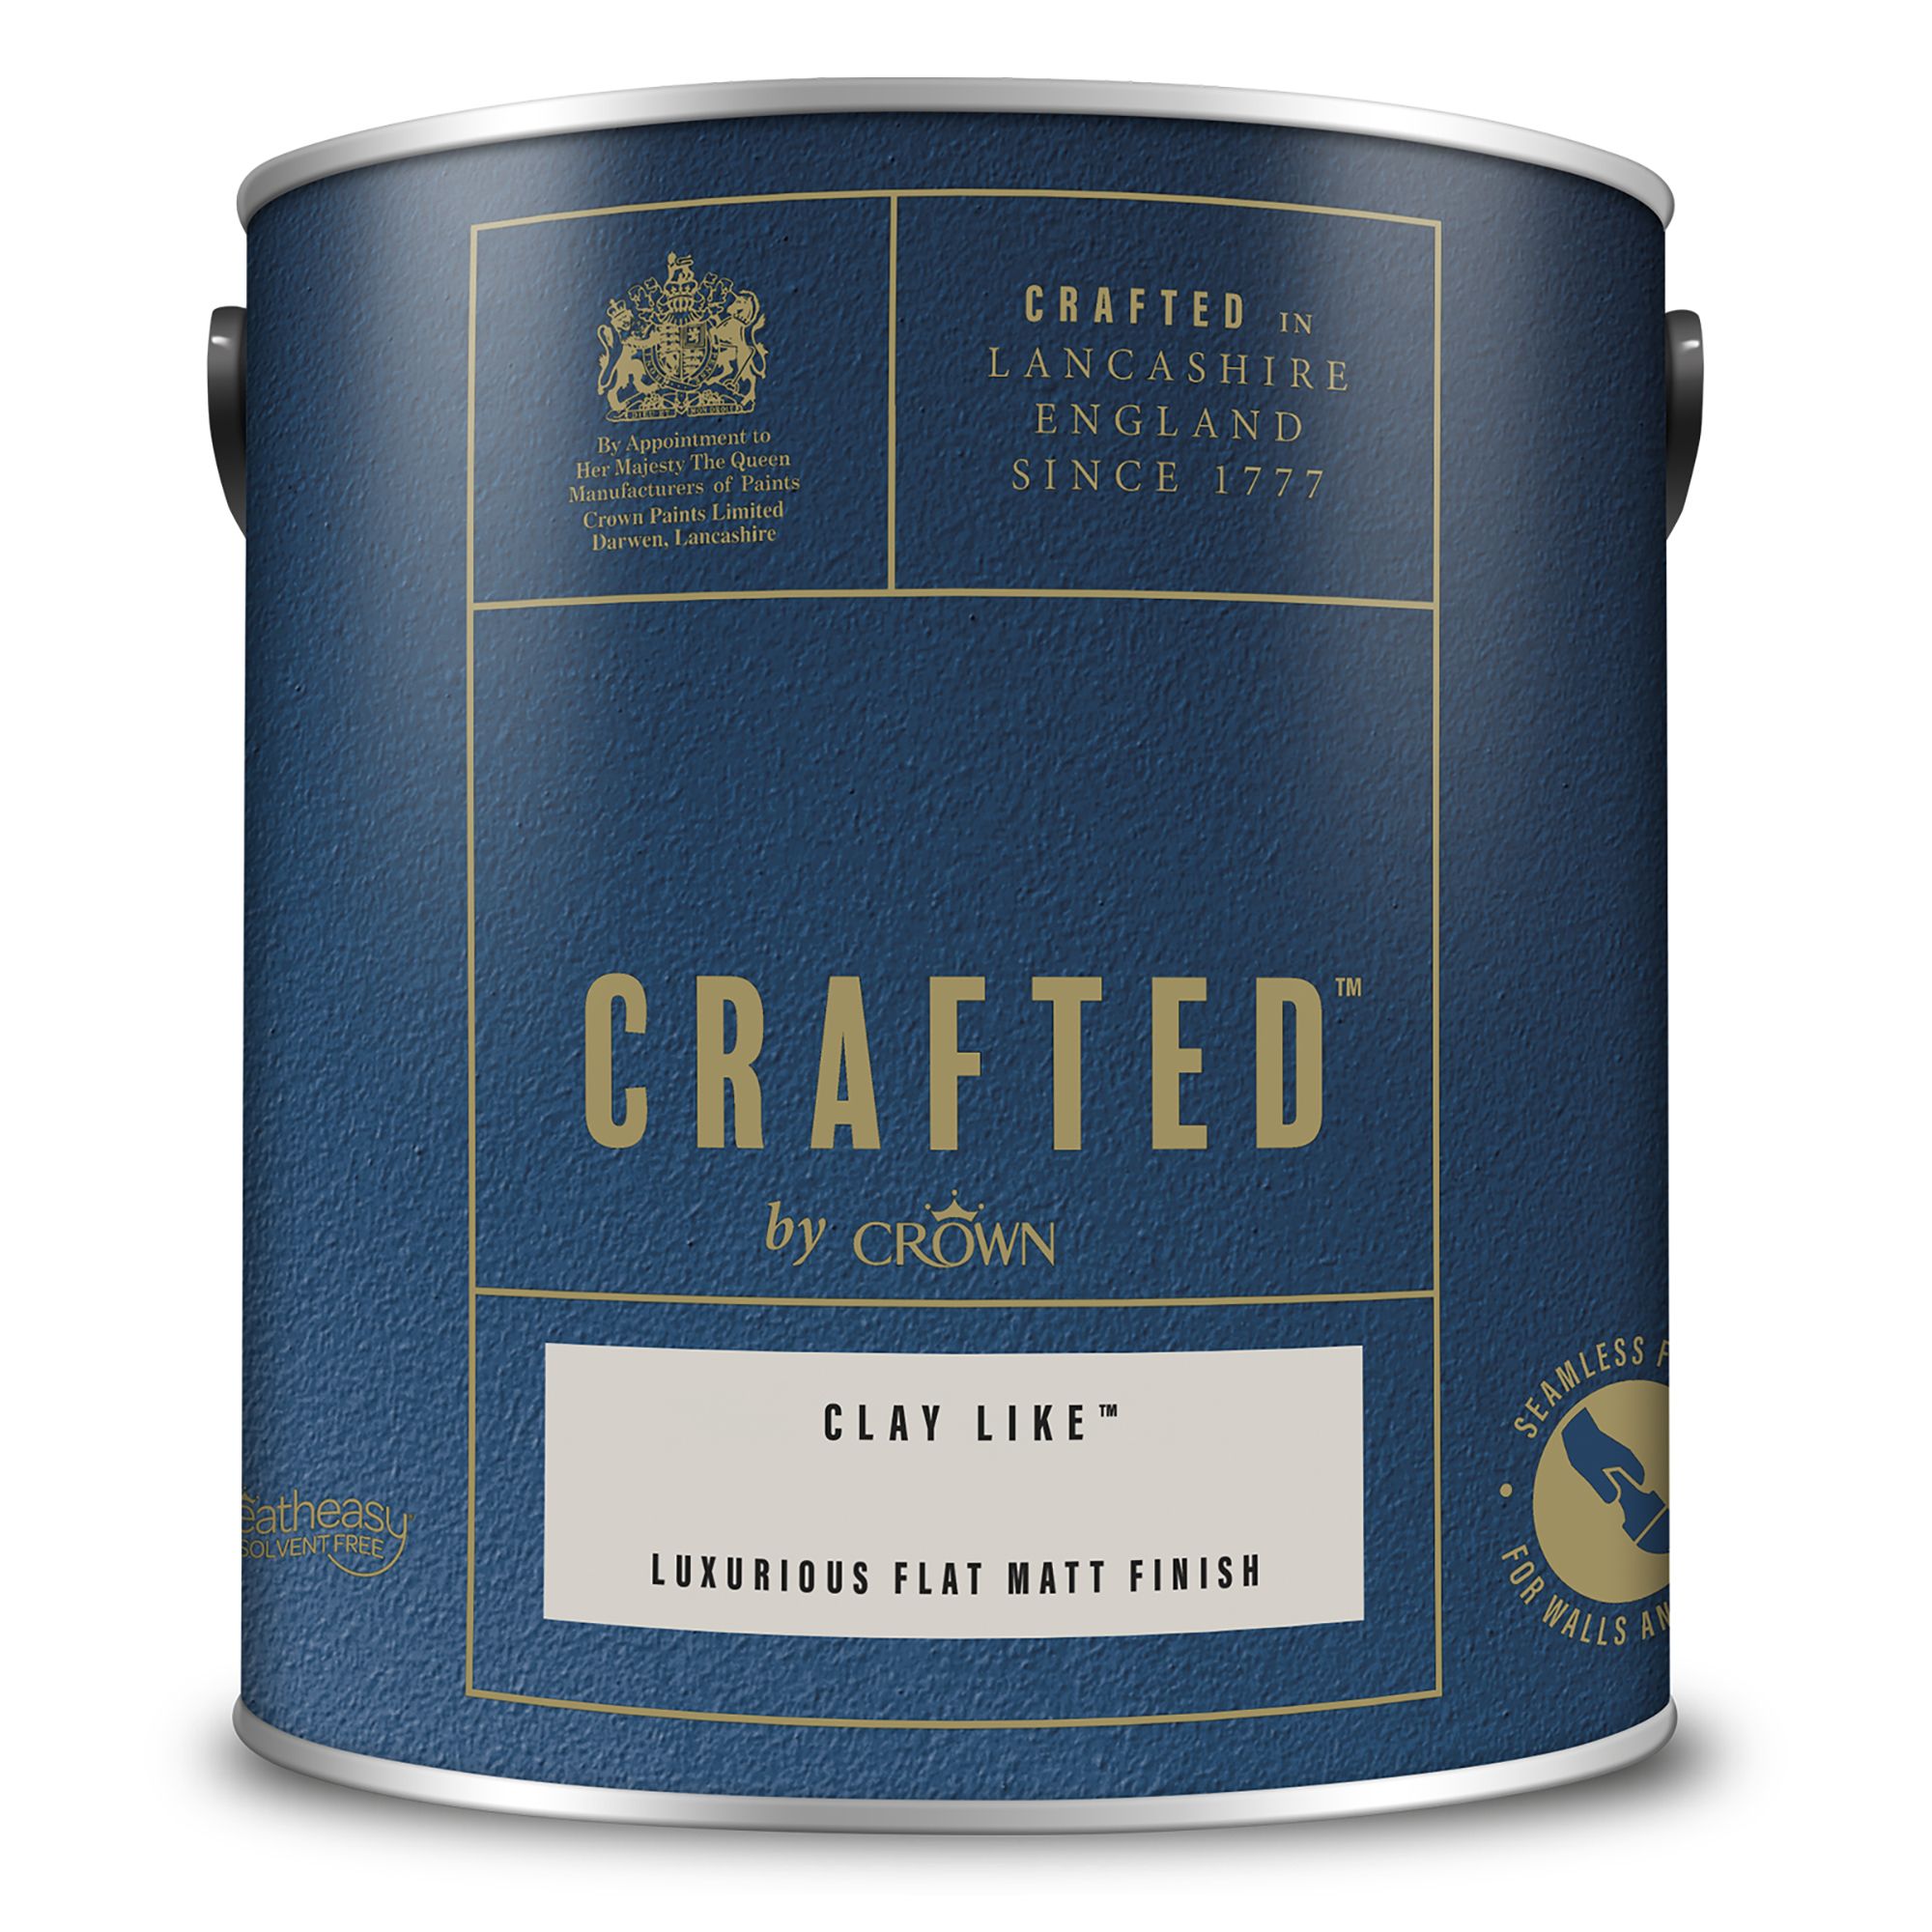 Crown Crafted Clay Like Matt Emulsion paint, 2.5L